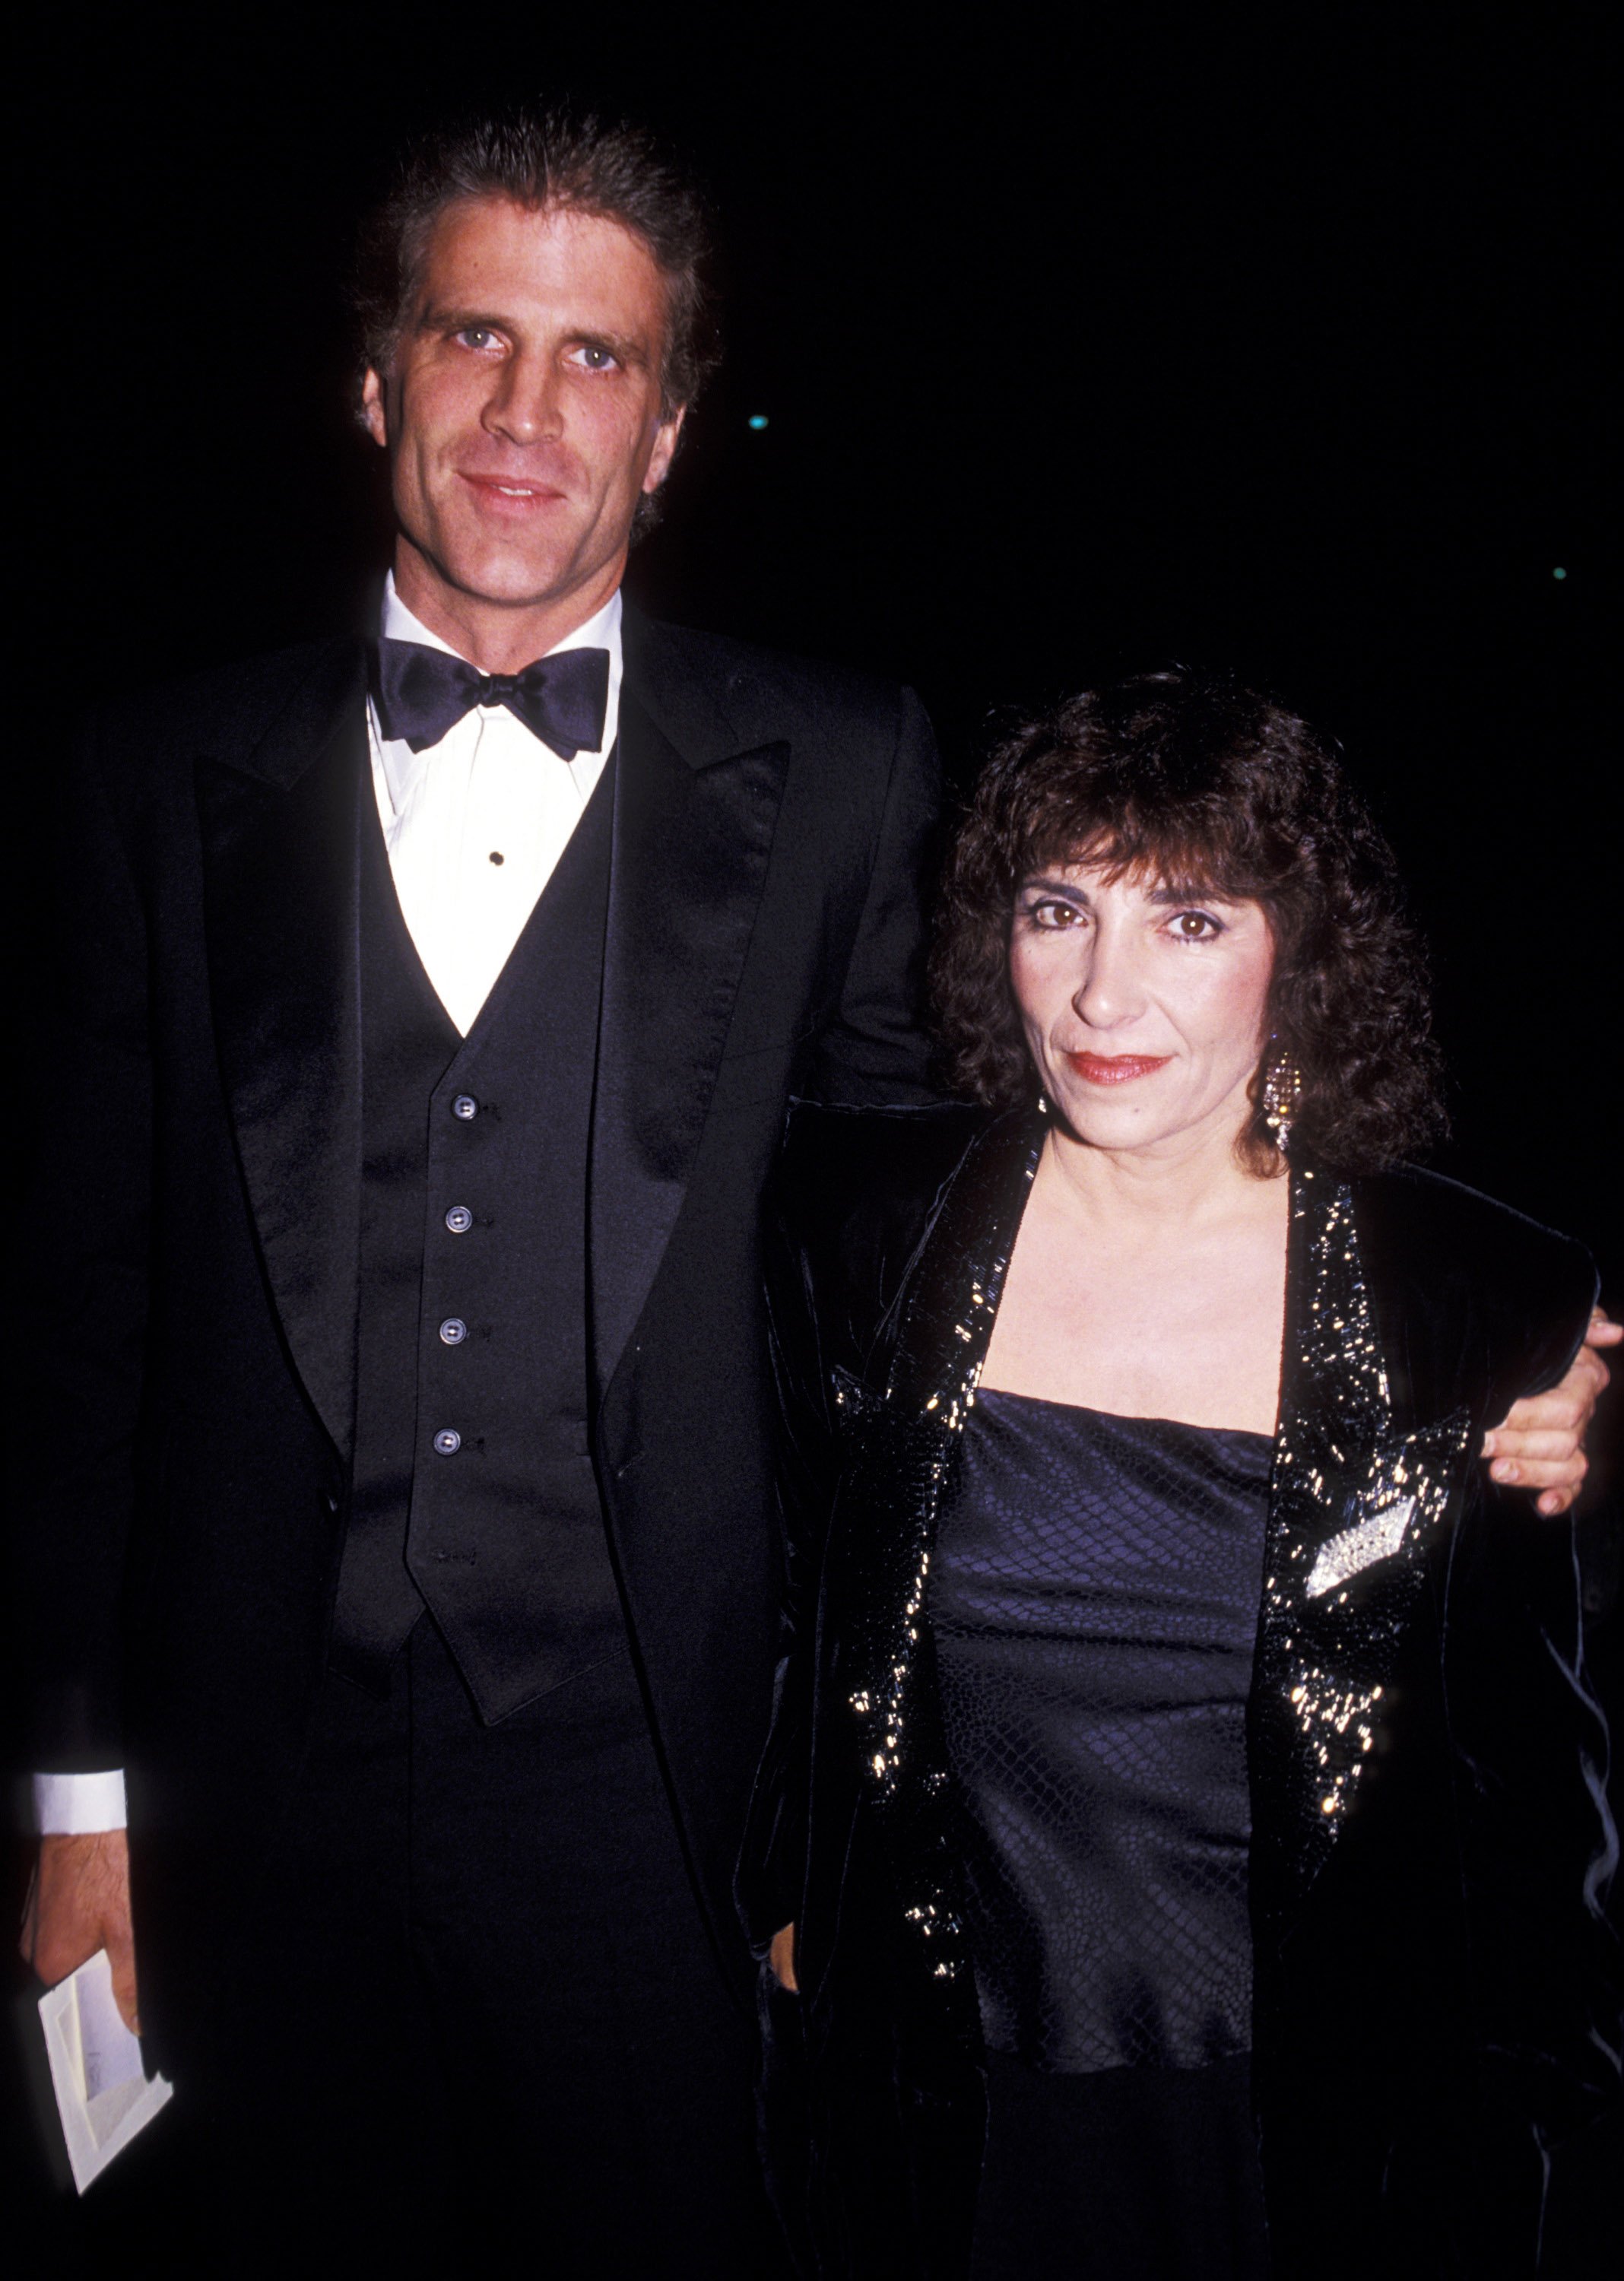 Ted Danson and Casey Coates during 39th Annual Emmy Awards - September 20, 1987 at Pasadena Civic Auditorium in Pasadena, California, United States | Source: Getty Images